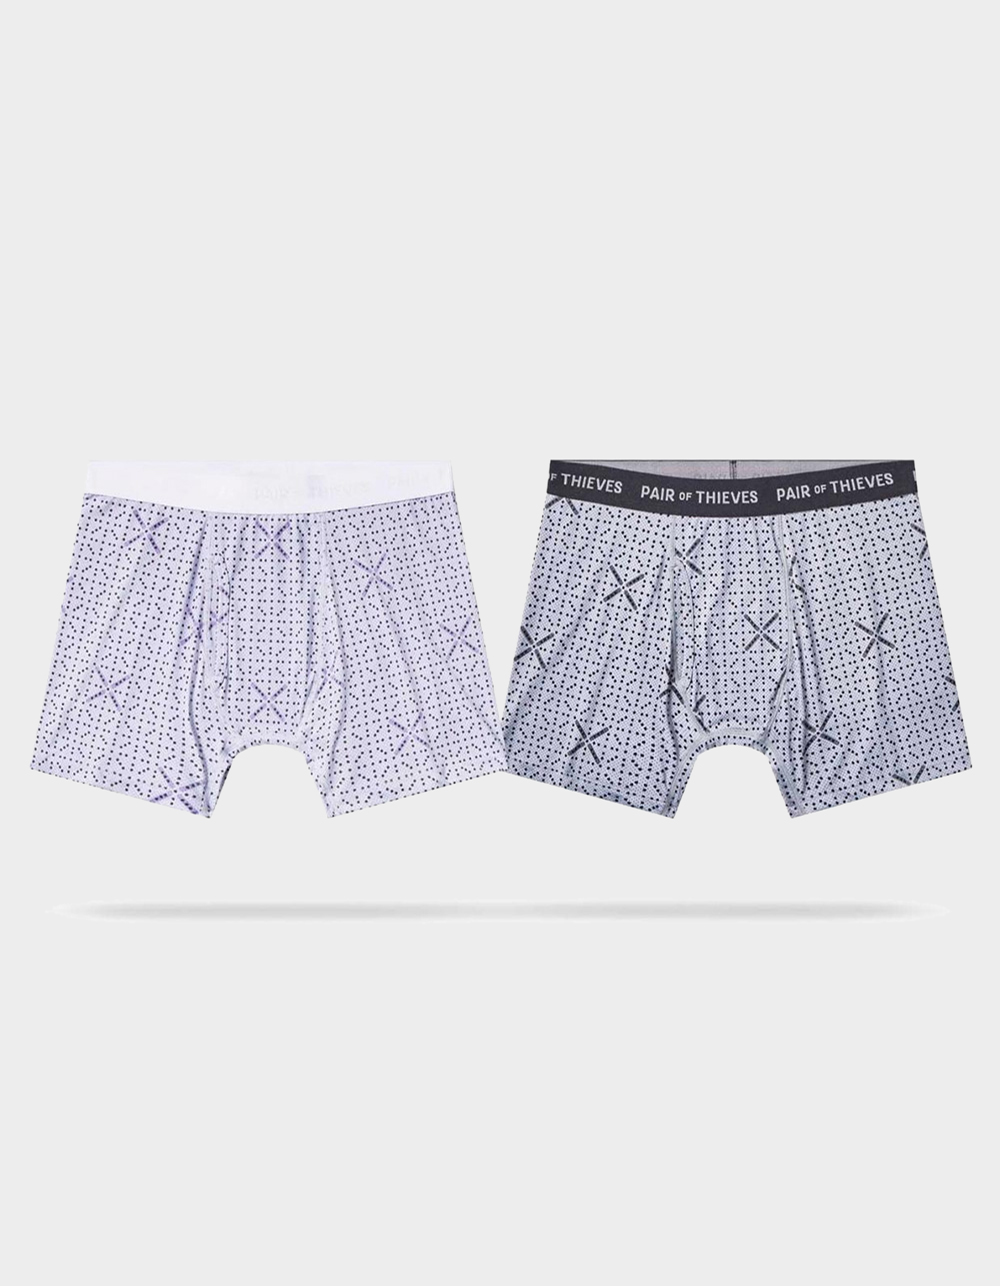 PAIR OF THIEVES Superfit Mens 2 Pack Boxer Briefs - GRAY COMBO | Tillys